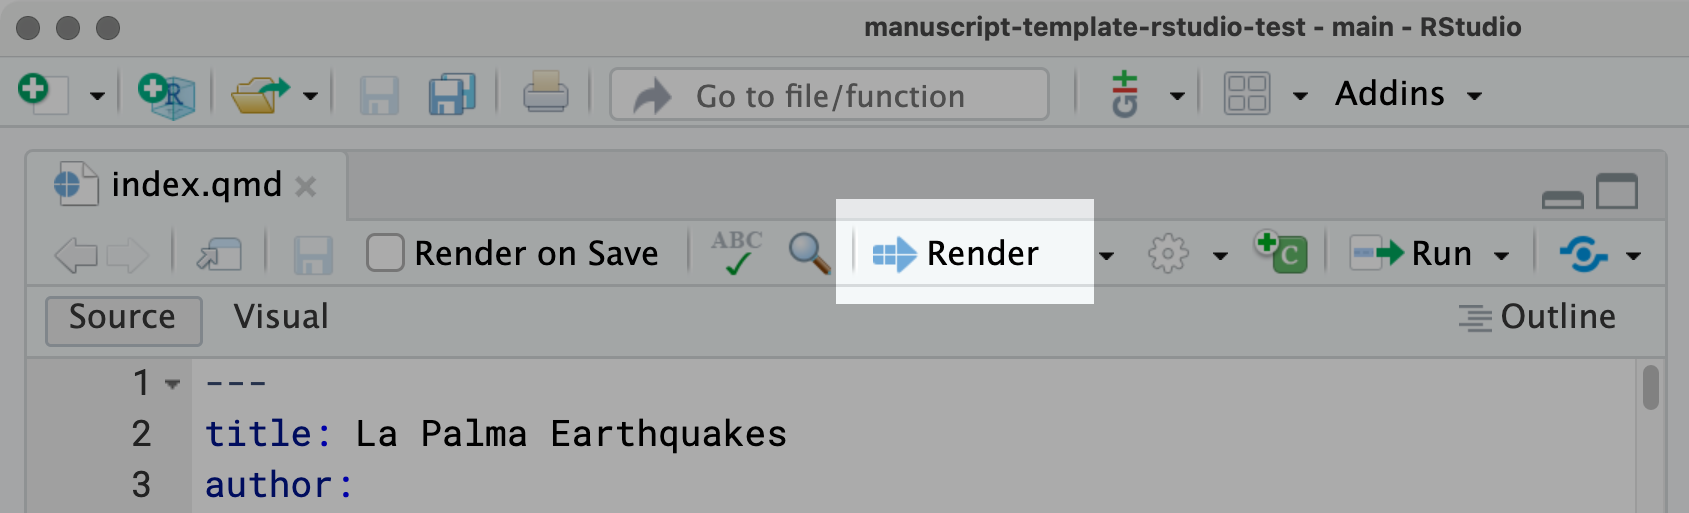 Screenshot of the source editor menu bar with the Render button highlighted.